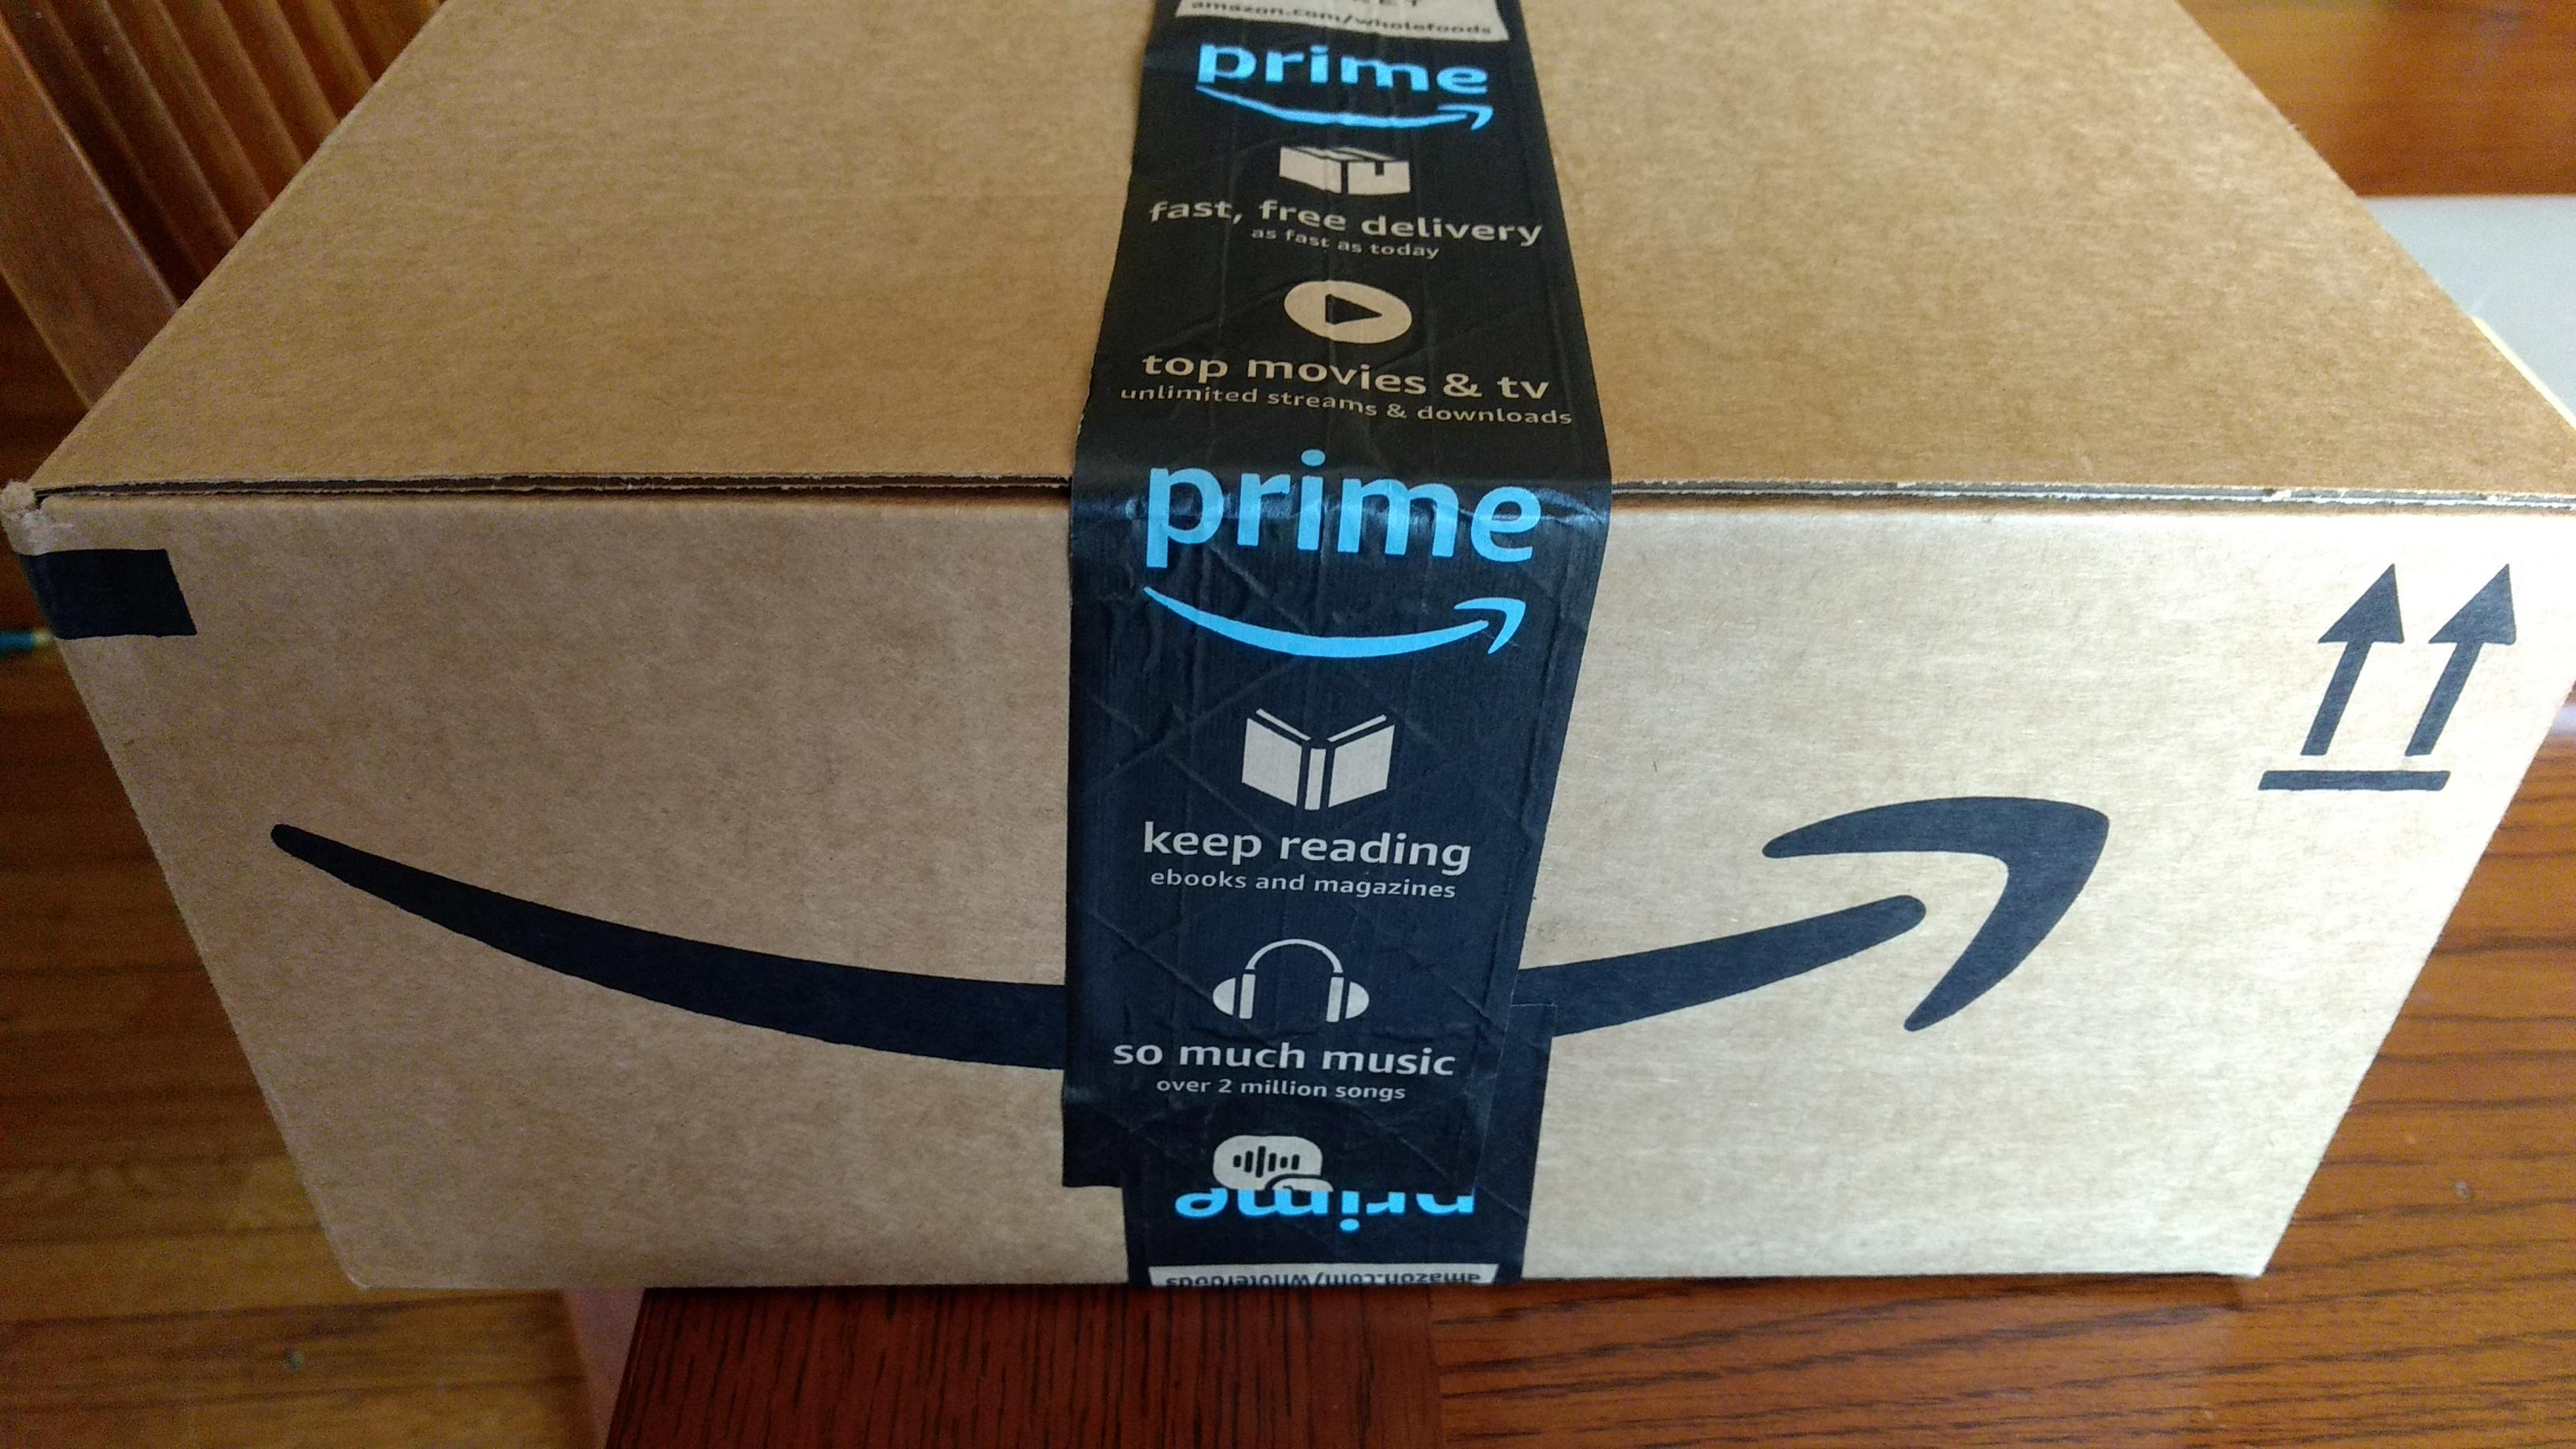 Box covered with Amazon Prime packaging tape advertising diverse offers and services